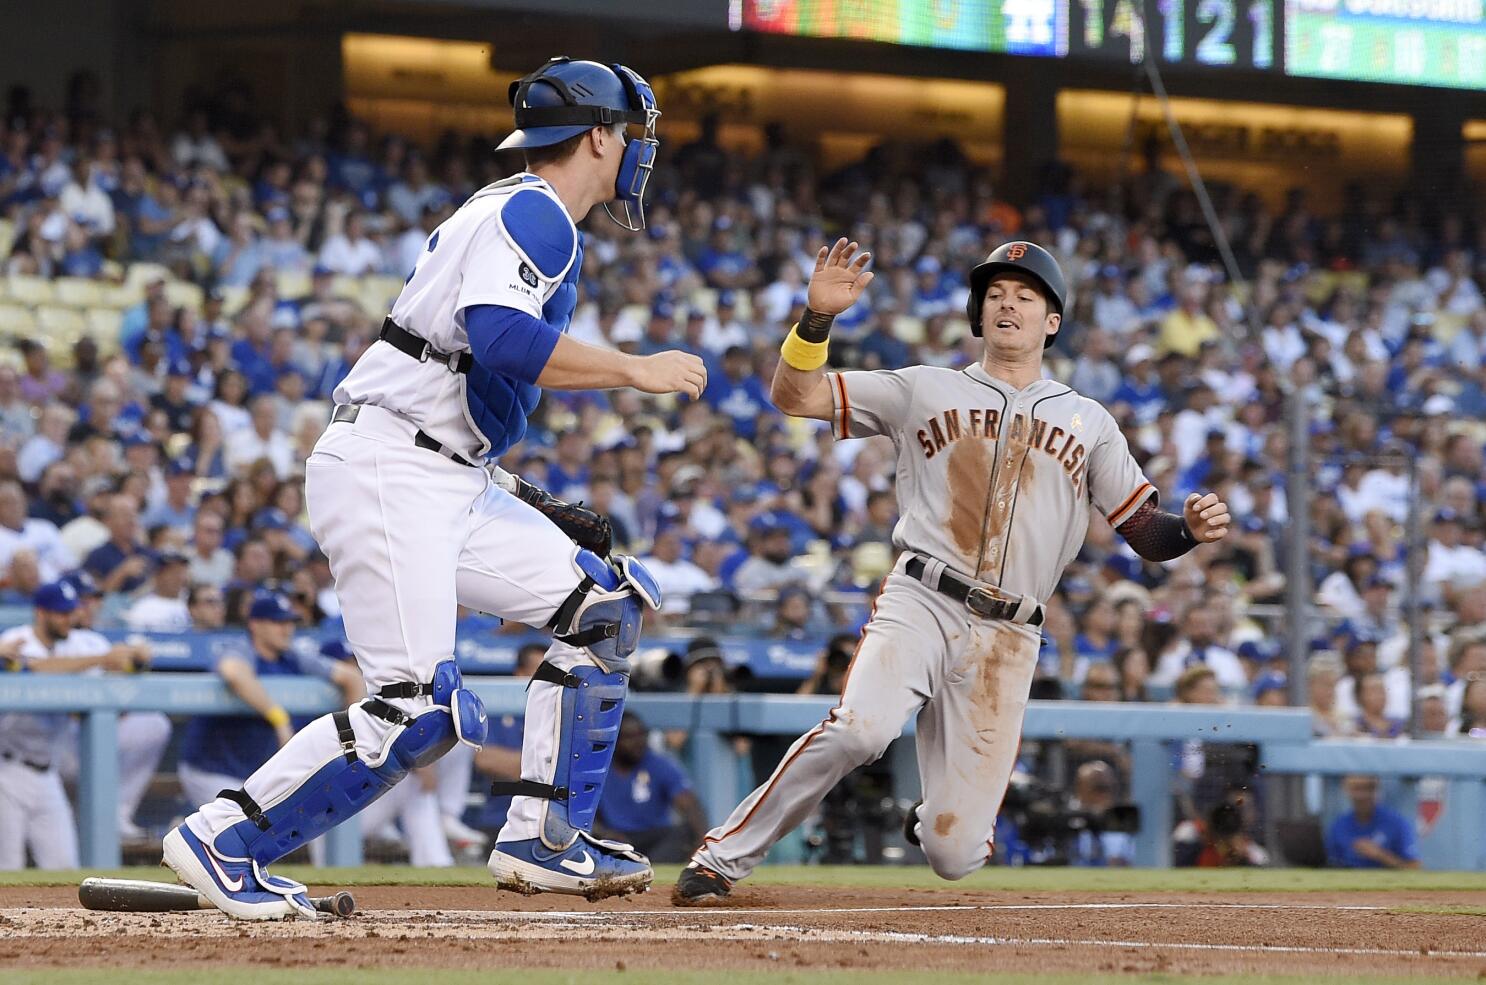 Dodgers lose their home opener to Giants, 1-0 - Los Angeles Times